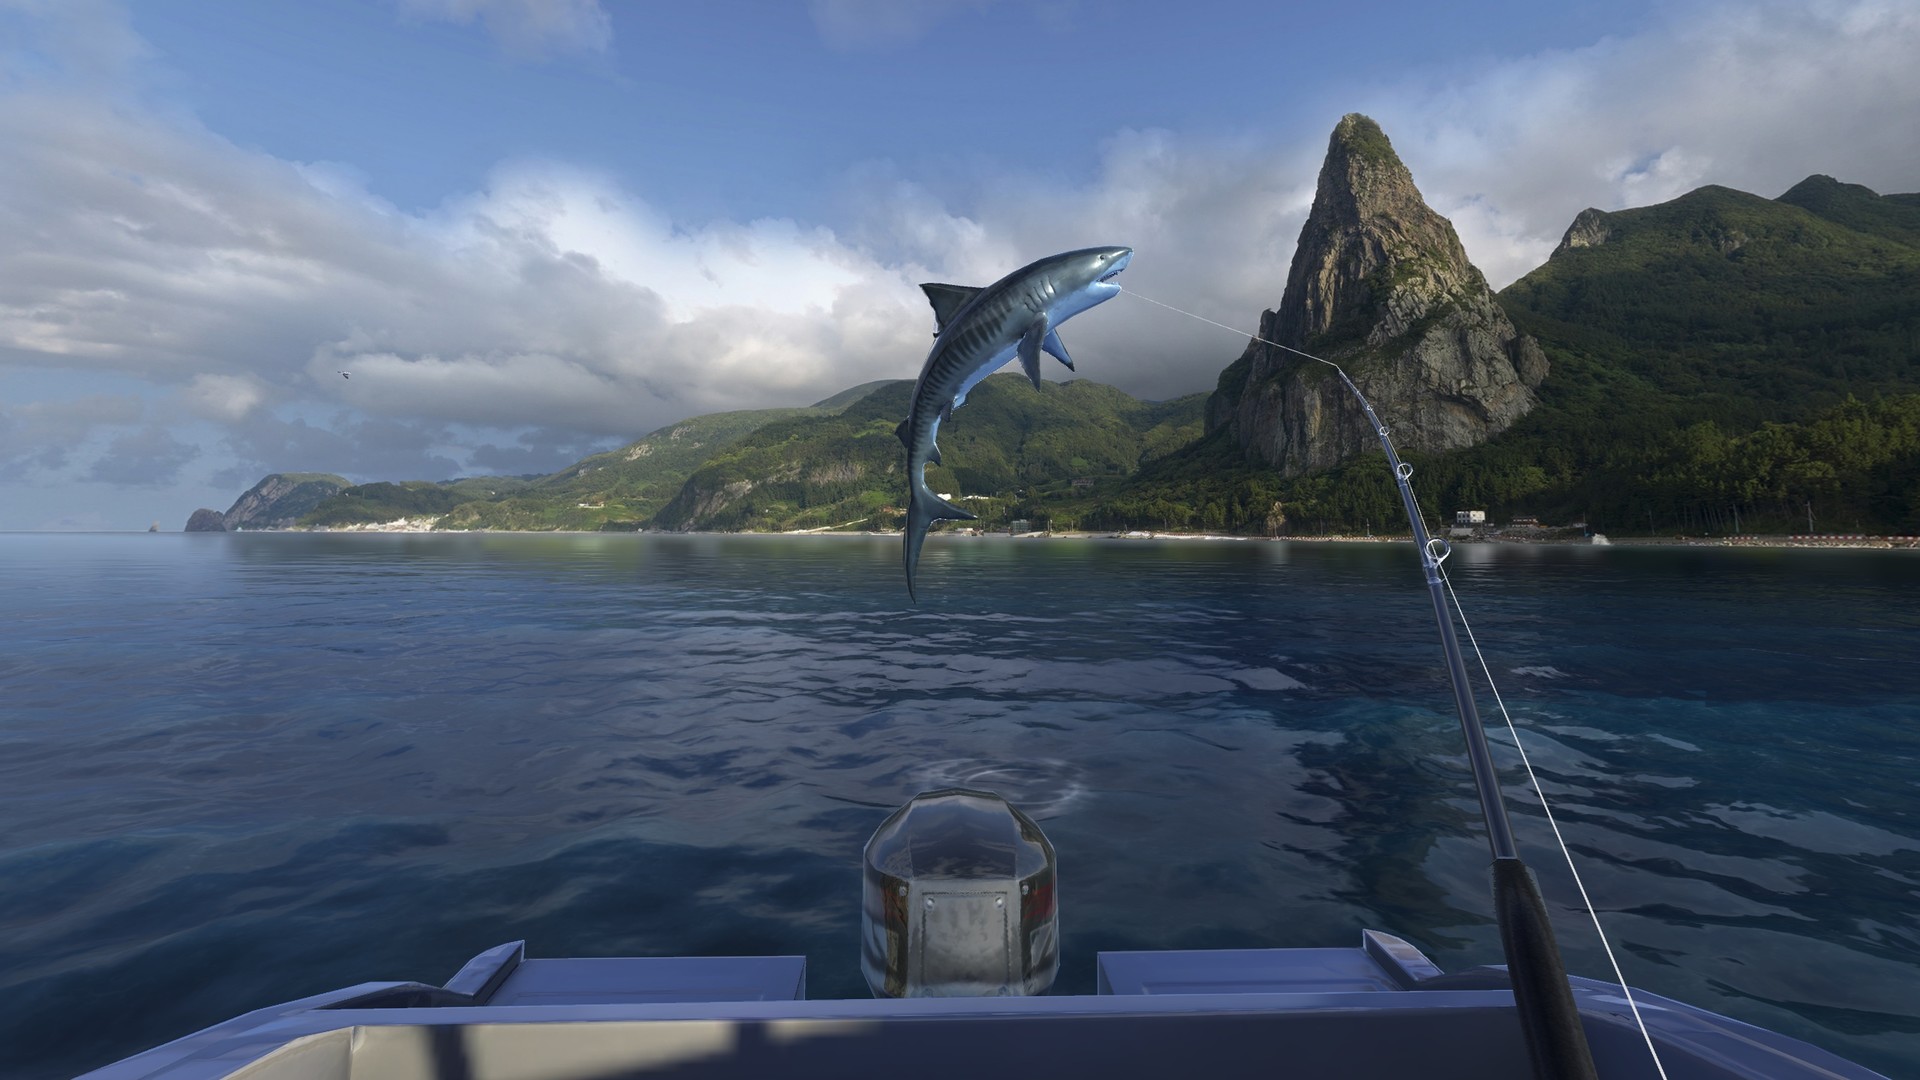 Real Vr Fishing Steam Store, 51% OFF | www.lasdeliciasvejer.com